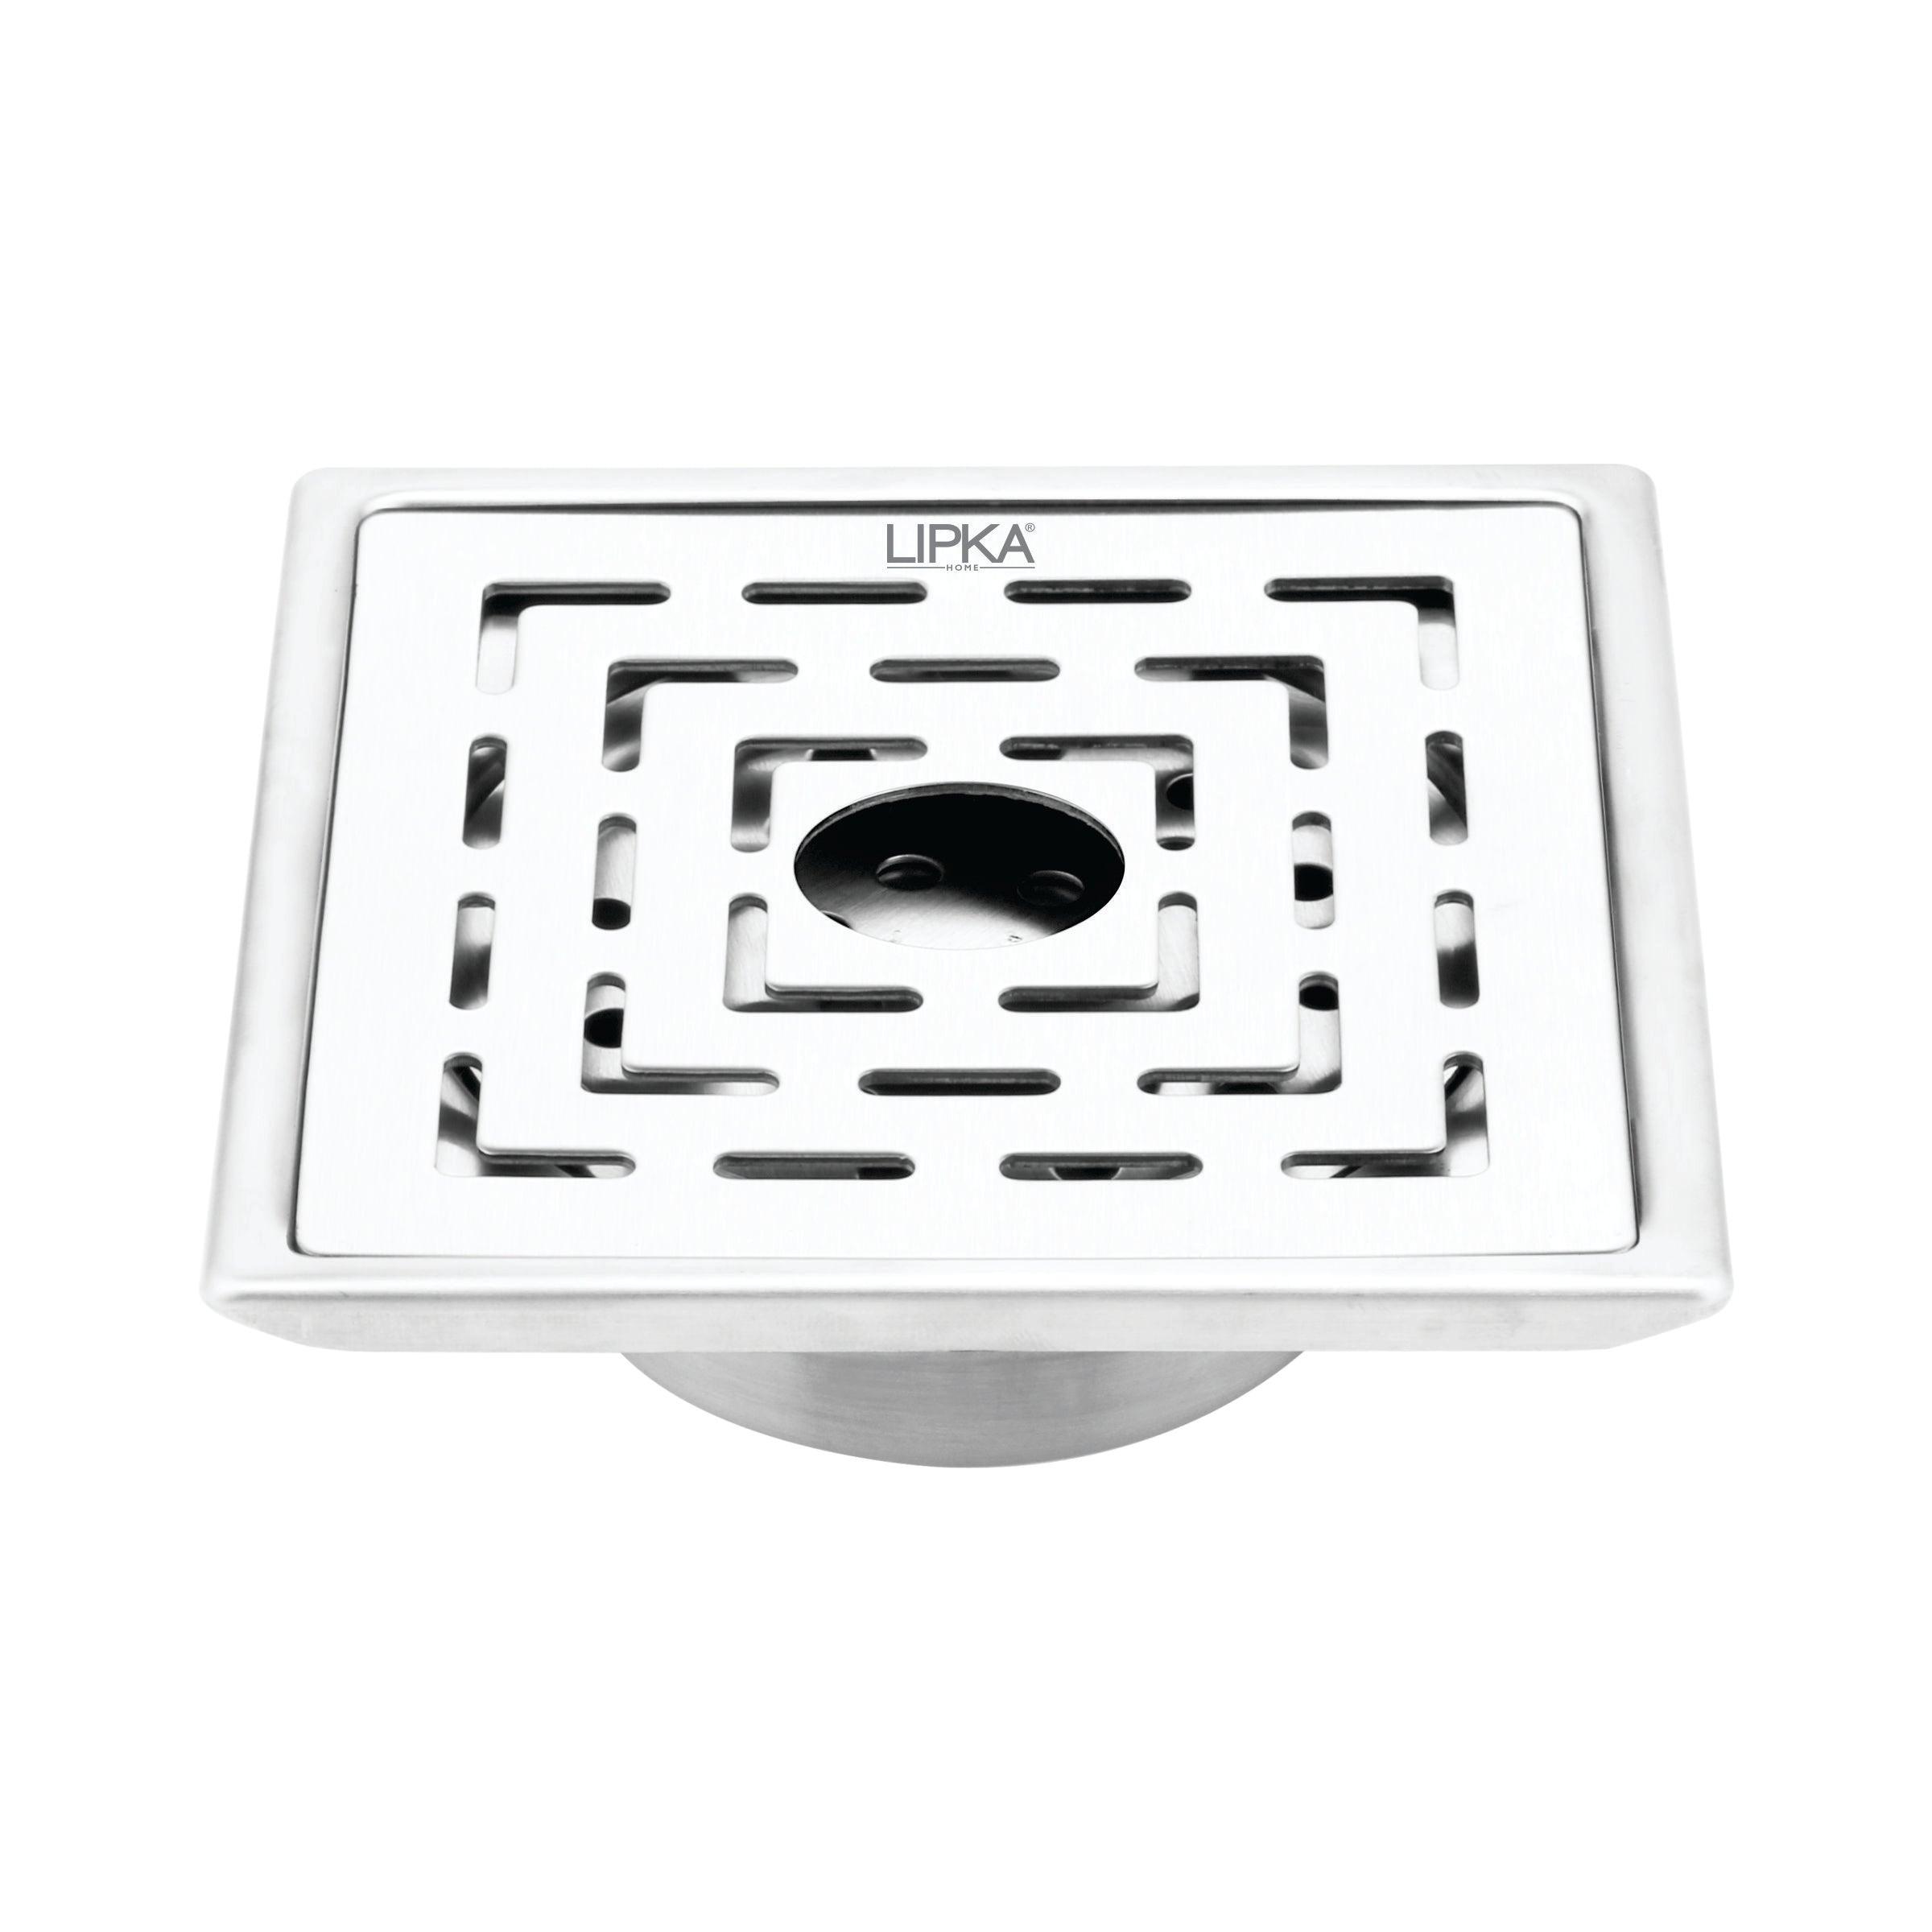 Orange Exclusive Square Floor Drain (5 x 5 Inches) with Hole and Cockroach Trap